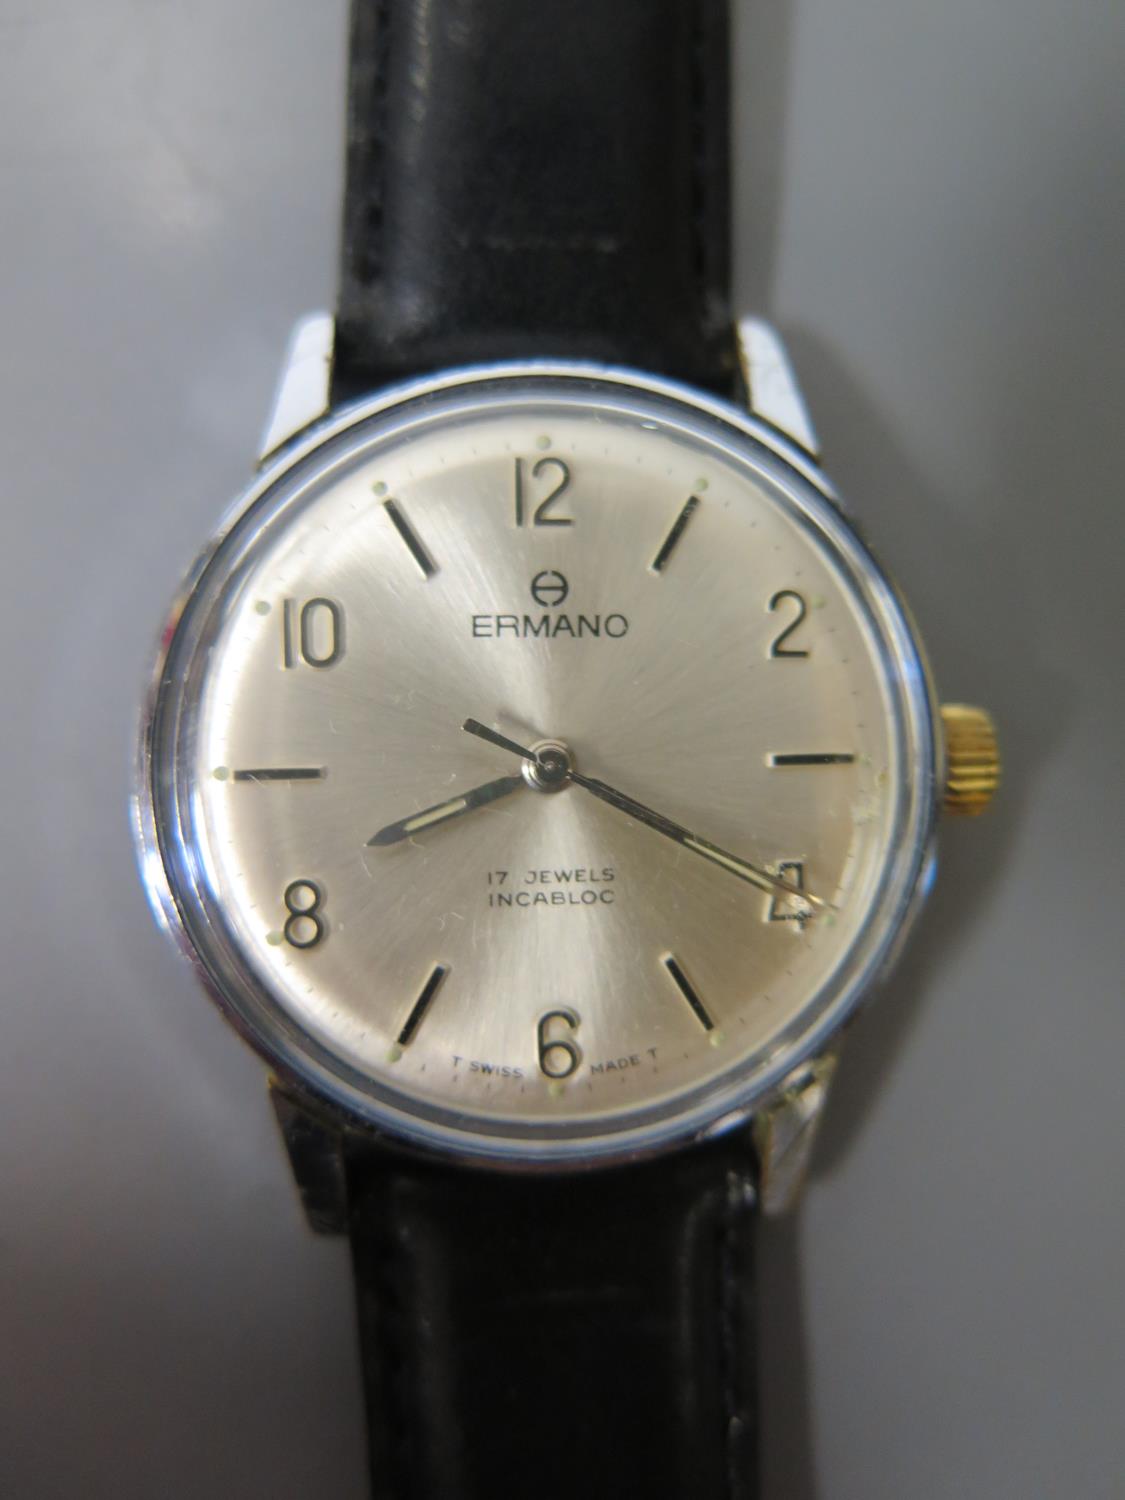 An Ermano Gent's Maual Stainless Steel Wristwatch, running